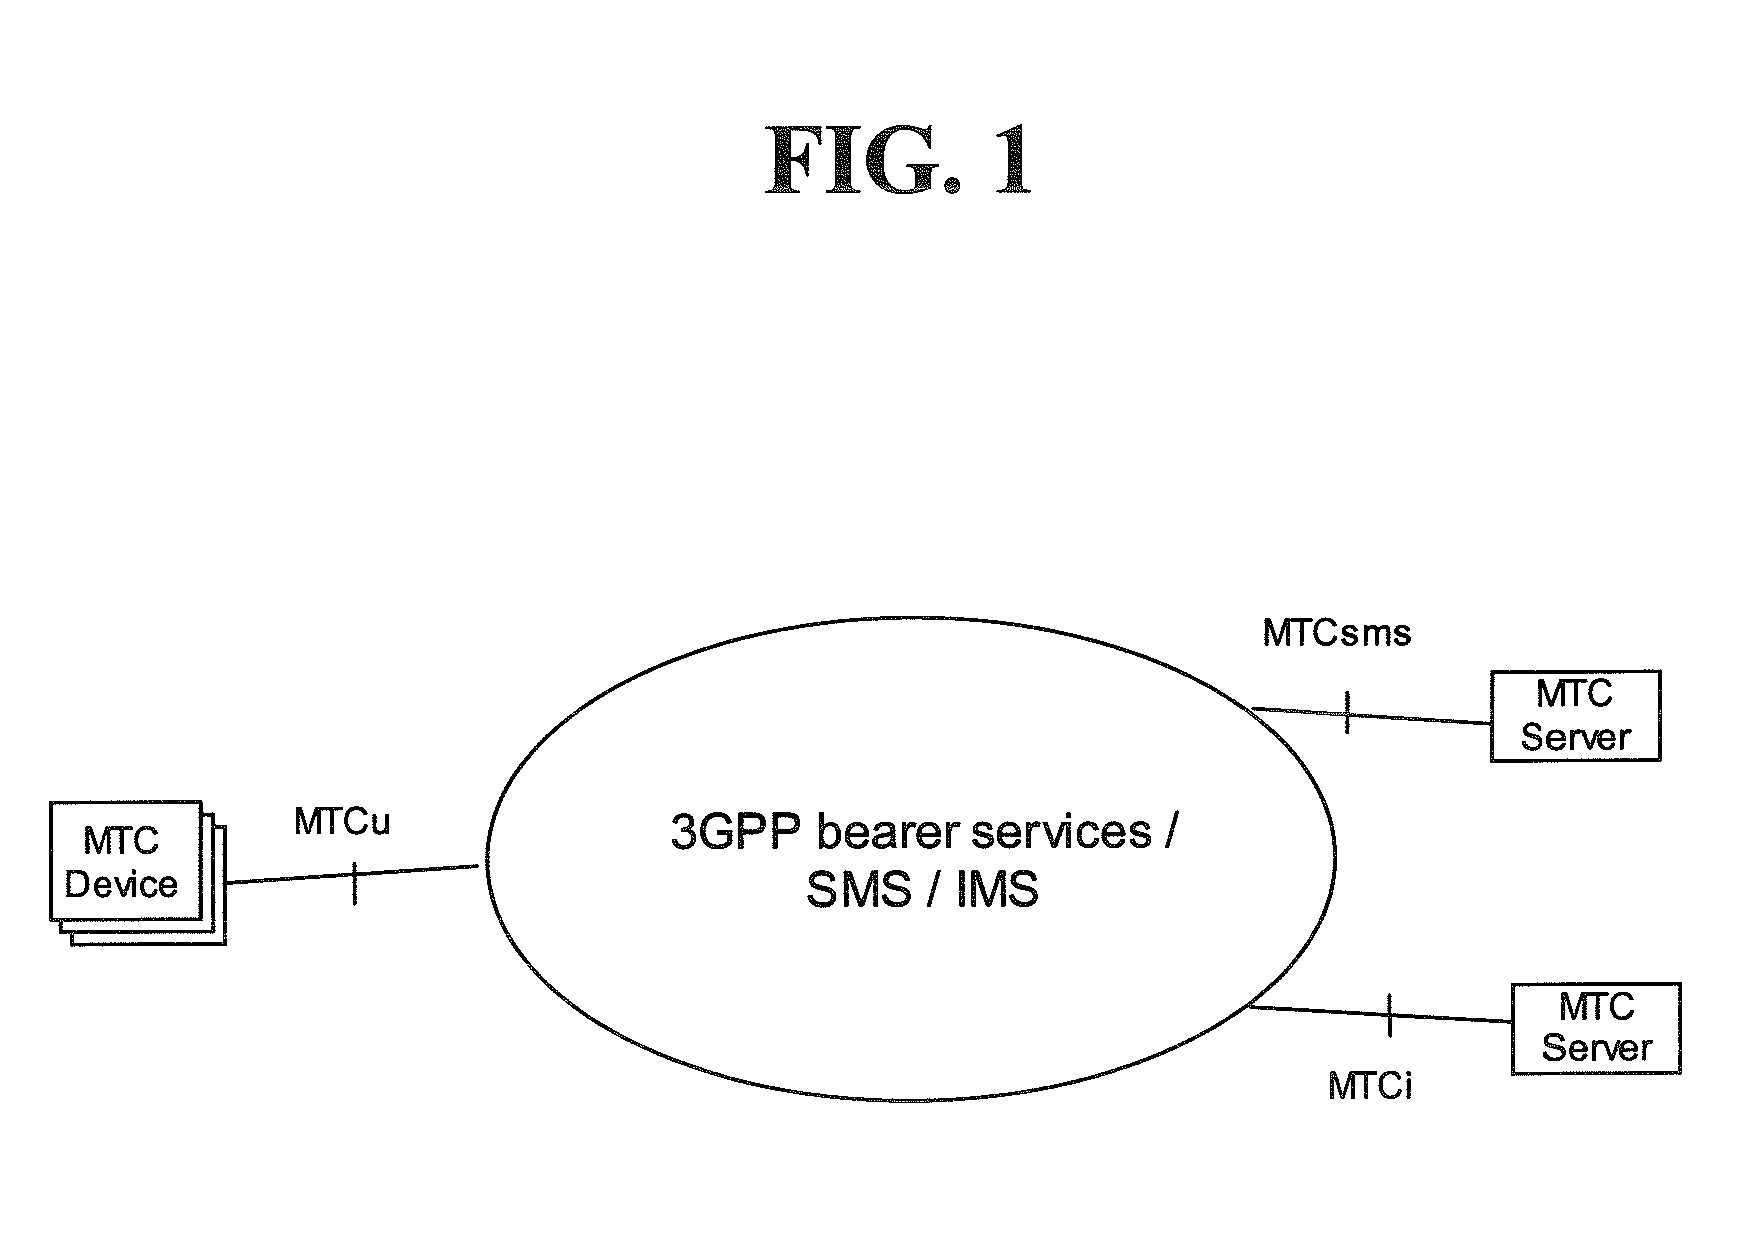 Method for Transmitting MTC Data in a Mobile Communication System